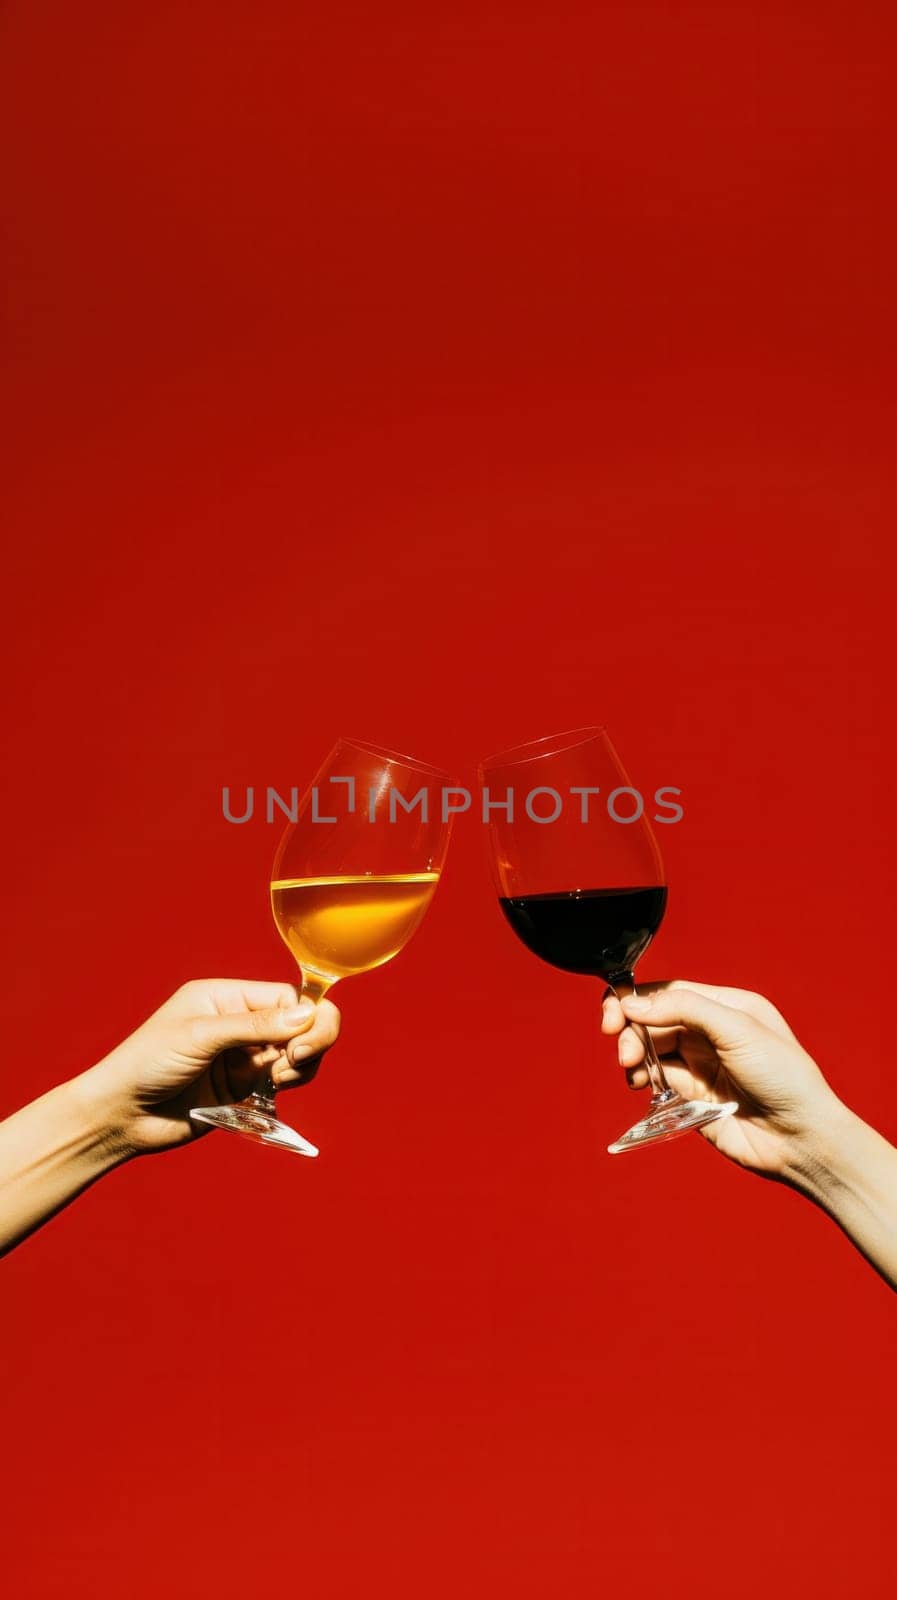 Two hands holding wine glasses in front of a red background, AI by starush